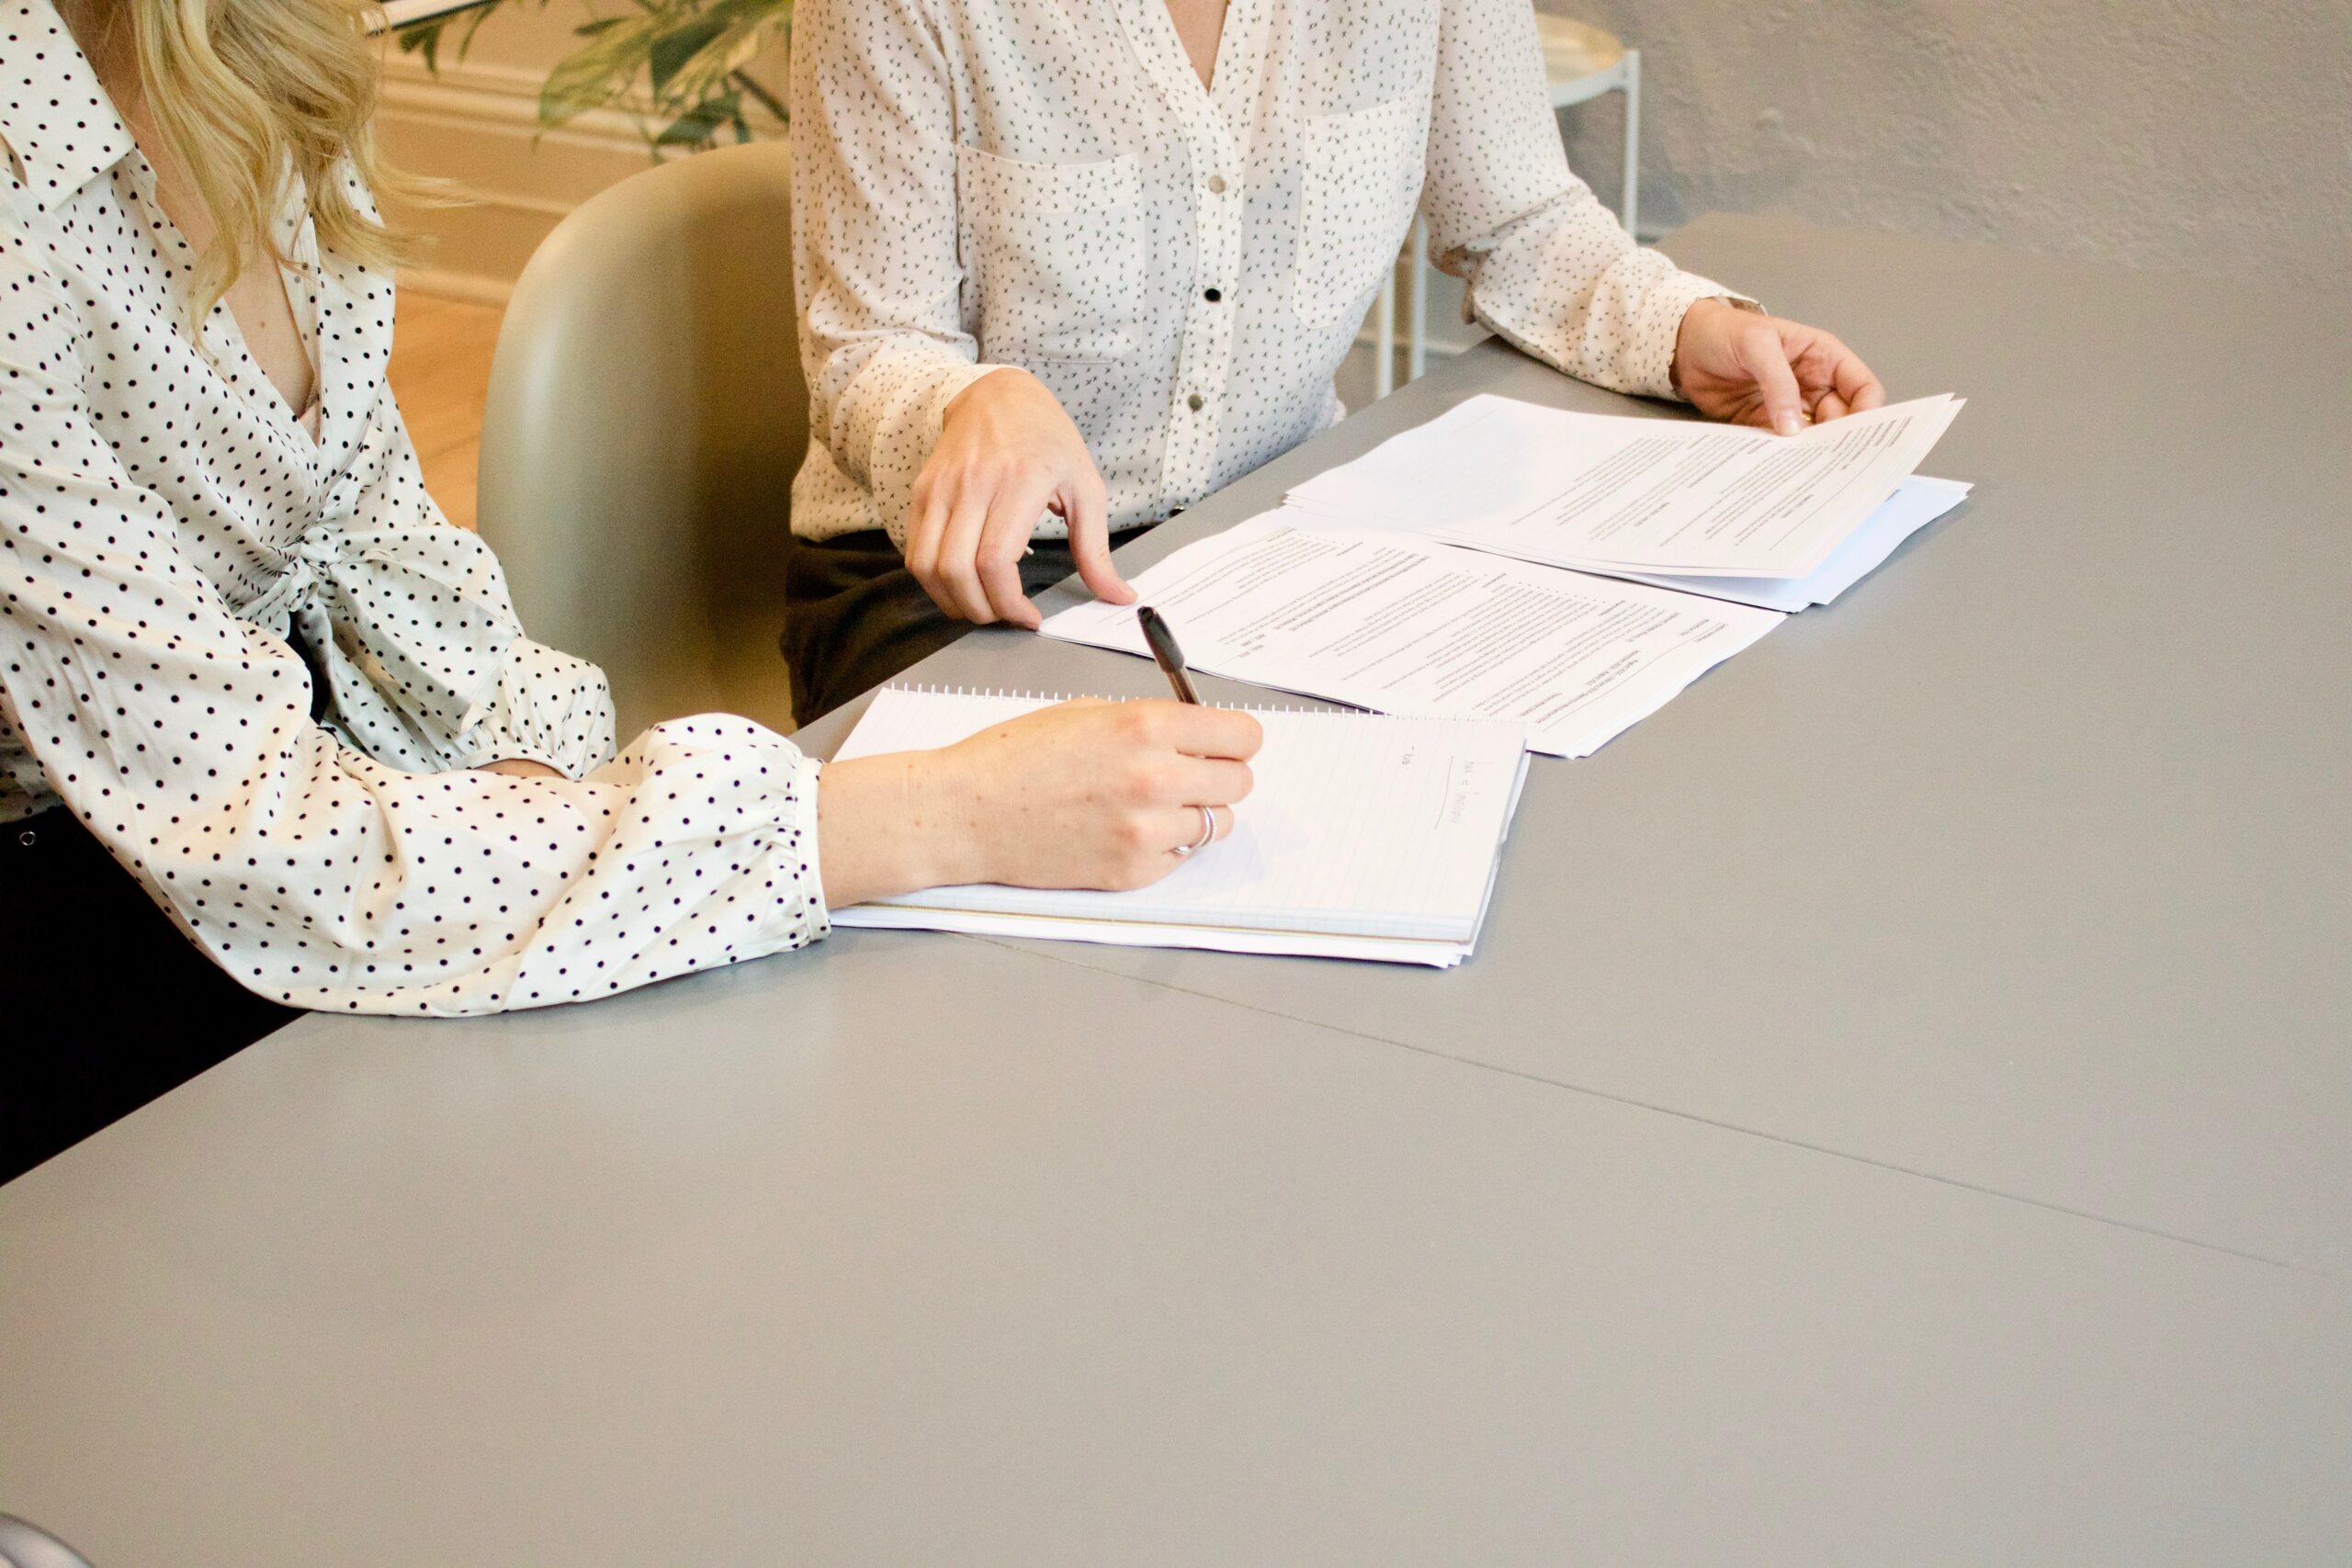 Two women sitting at a table signing a lease agreement.